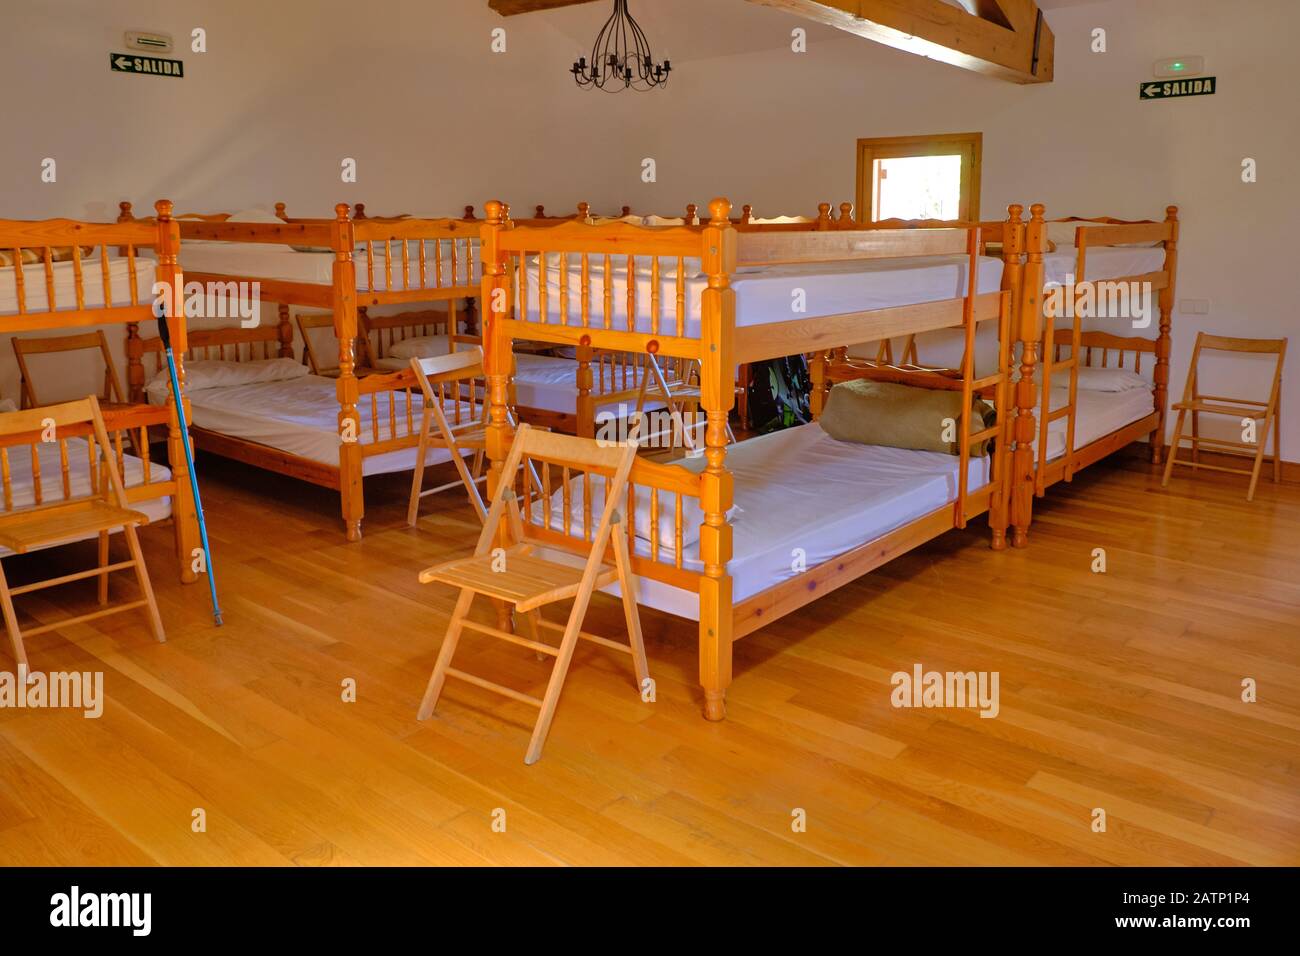 Inside of a pilgrim hostel dormitory on the Camino de Santiago, with wooden bunk beds. Stock Photo